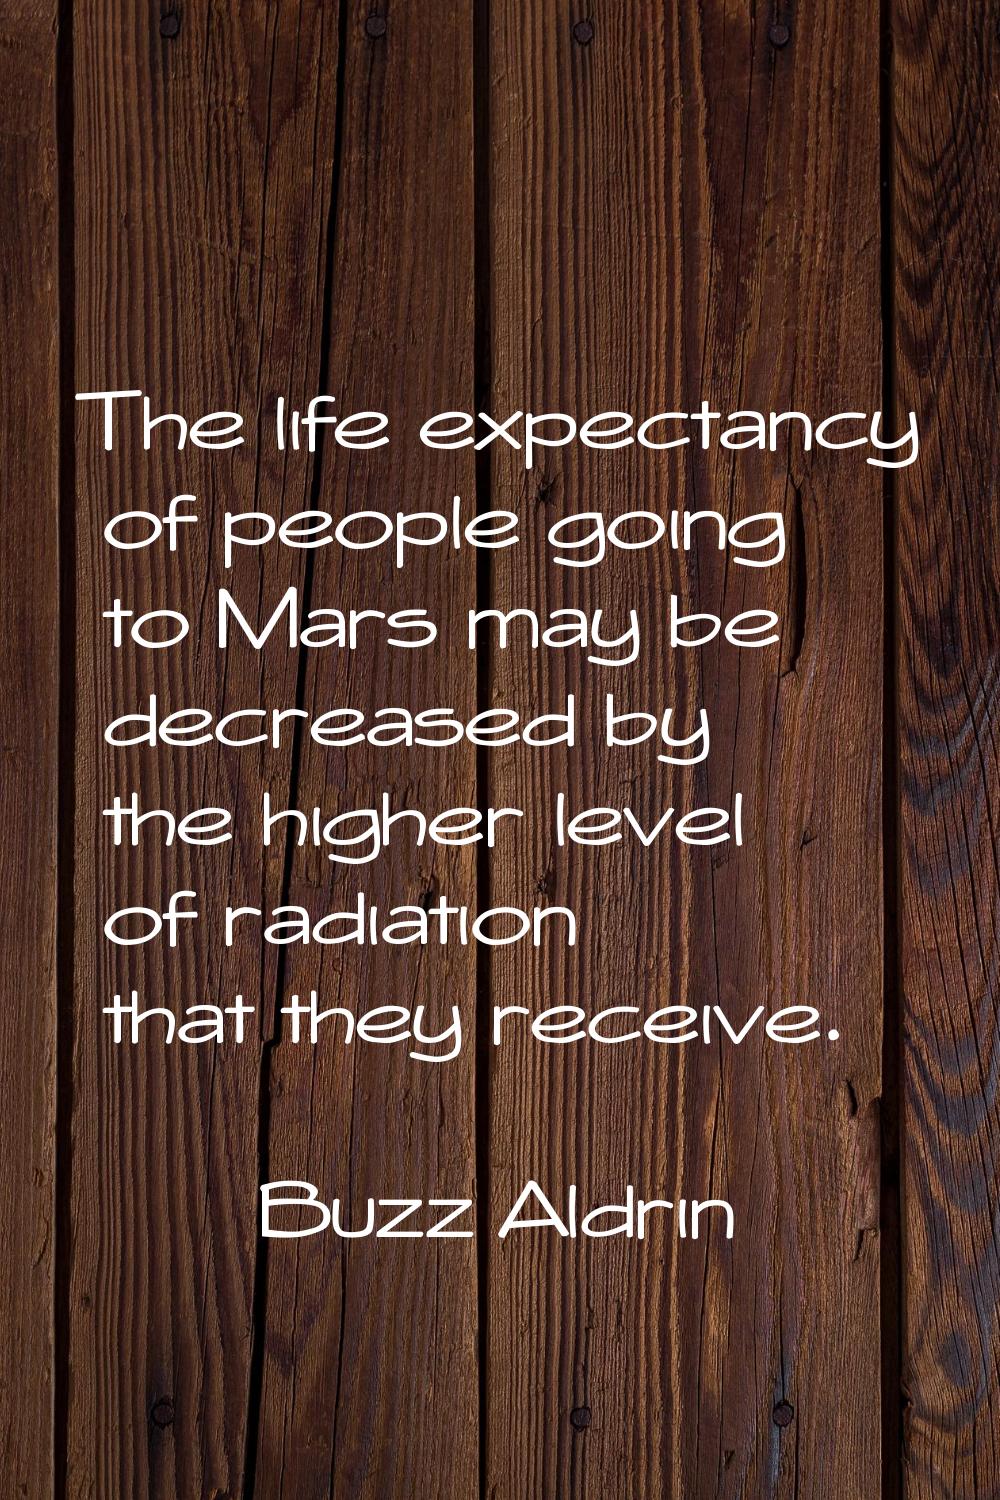 The life expectancy of people going to Mars may be decreased by the higher level of radiation that 